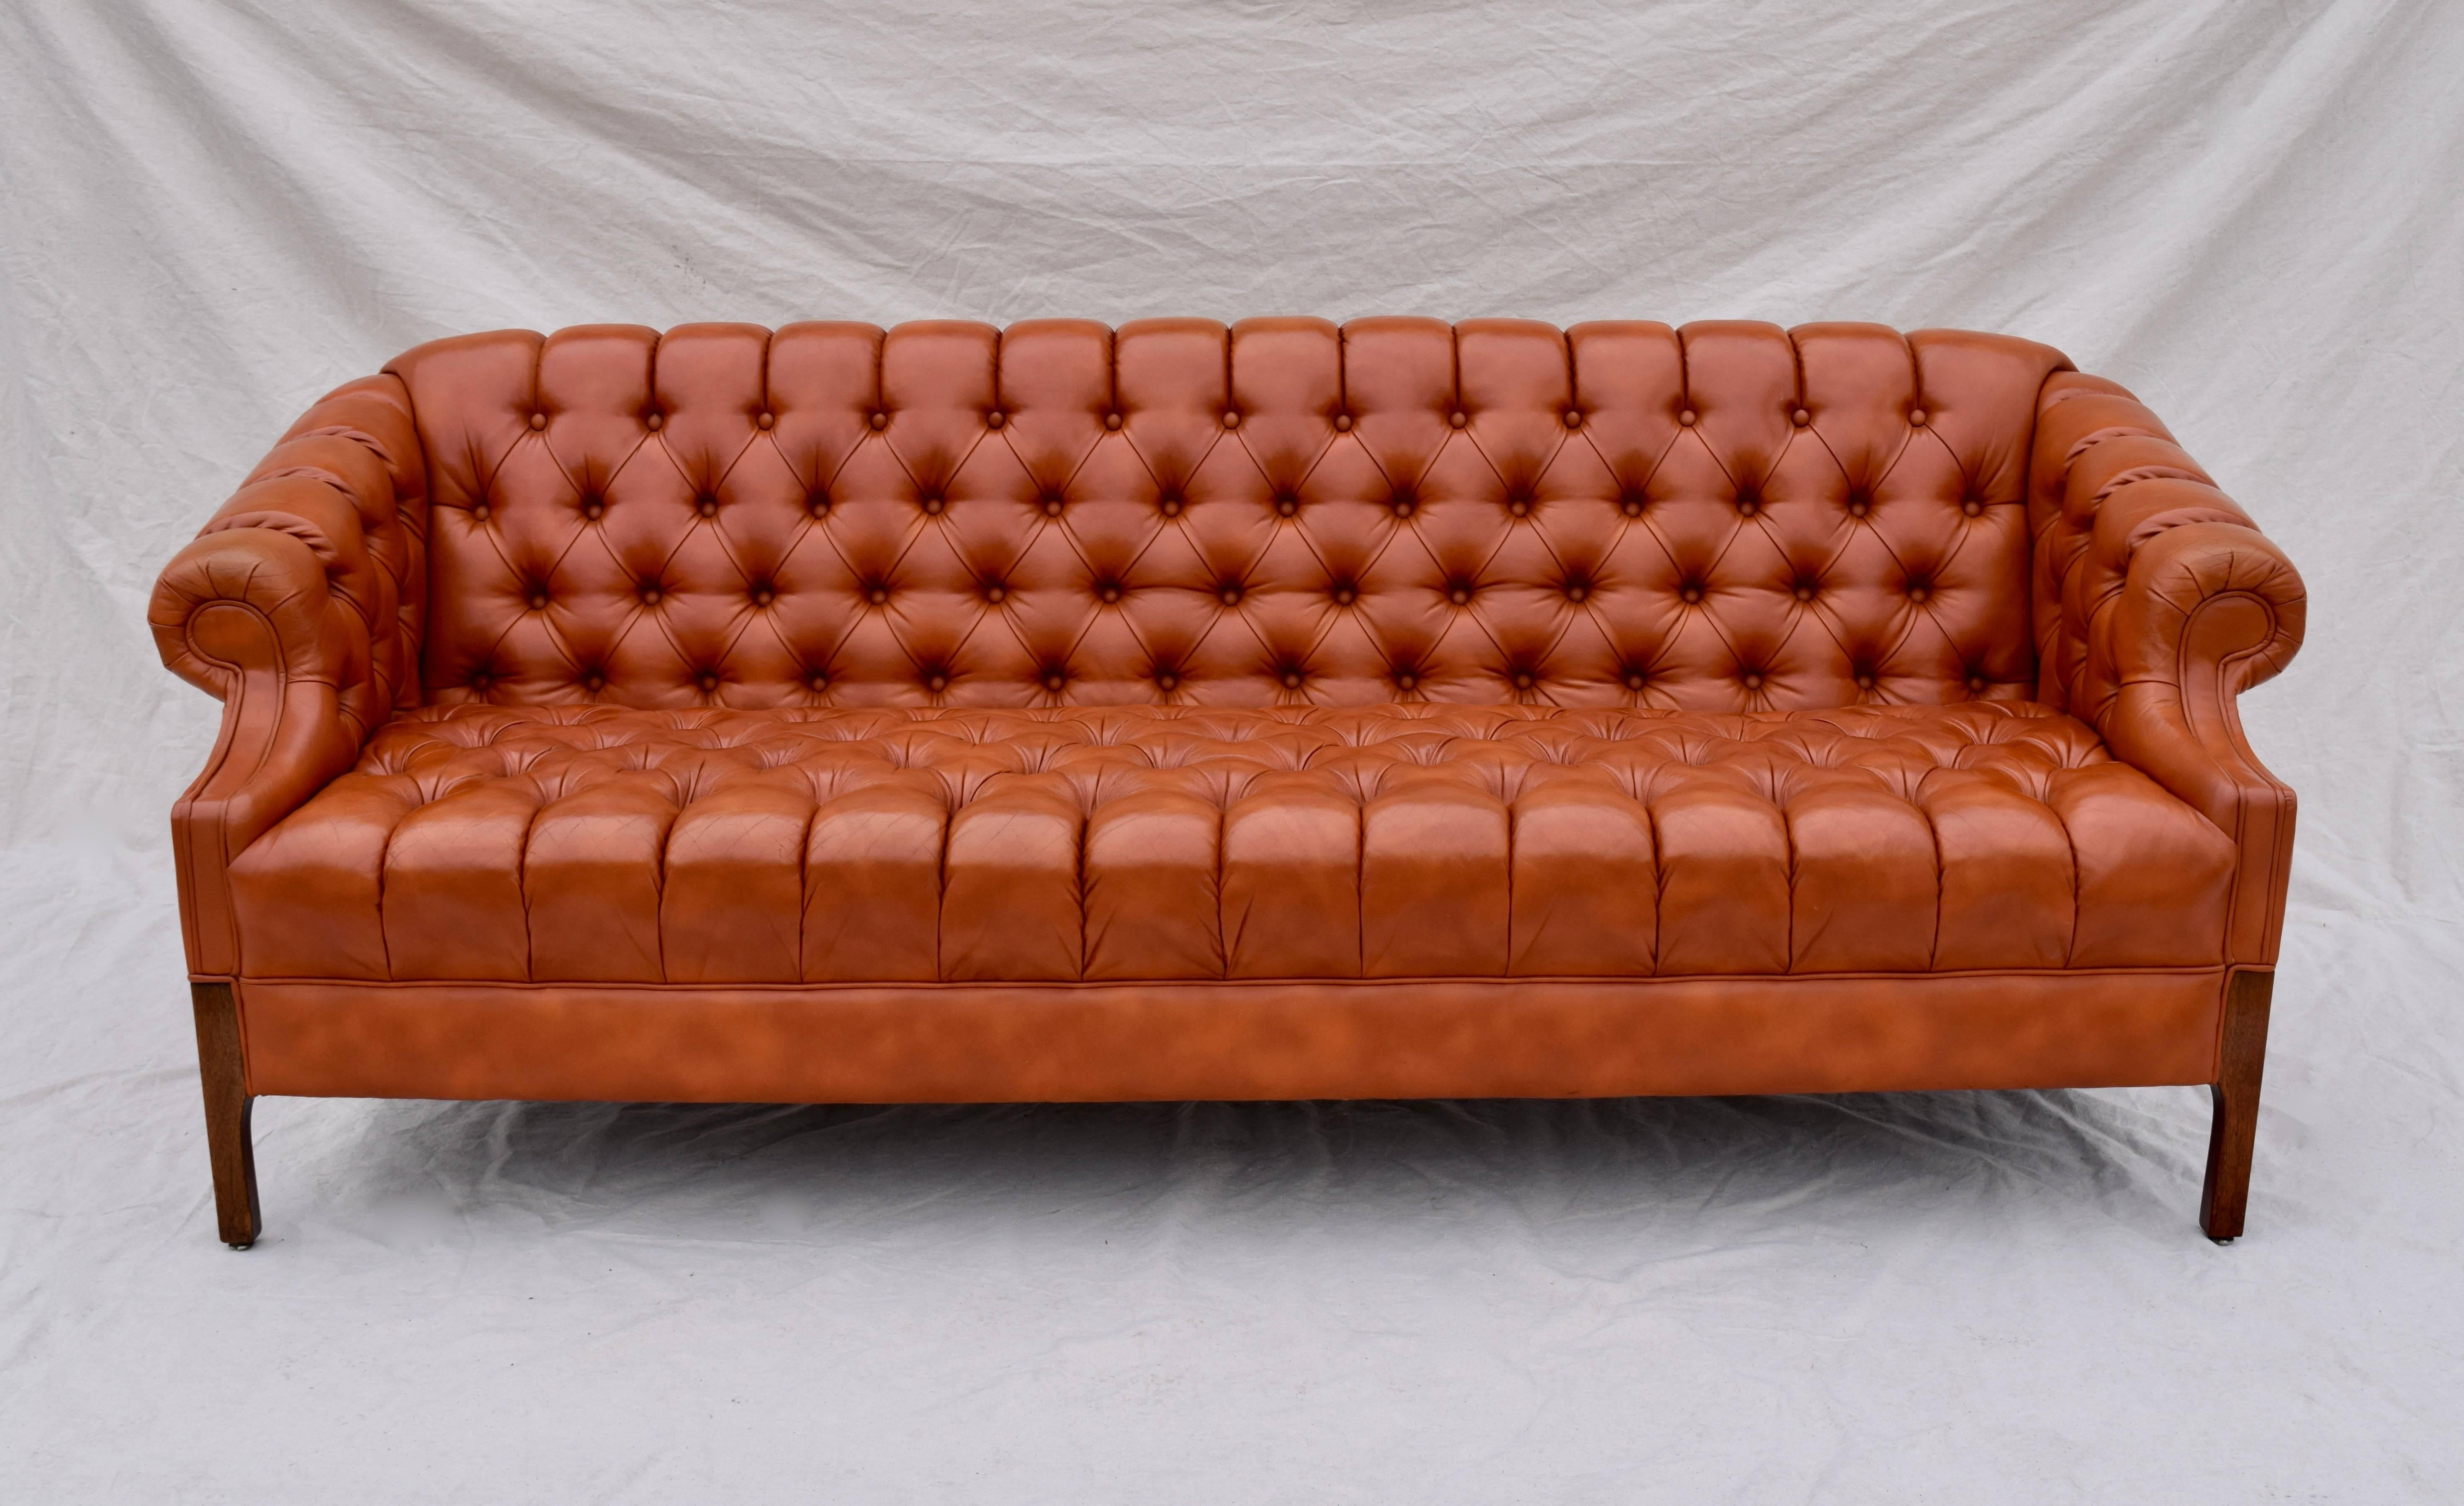 A Swedish leather Chesterfield sofa with deep button tufted back and arms, sitting on raised, lithe solid rosewood legs. Extraordinary comfort in exceptional vintage condition throughout, rarely used. Measures: Seat 17.5